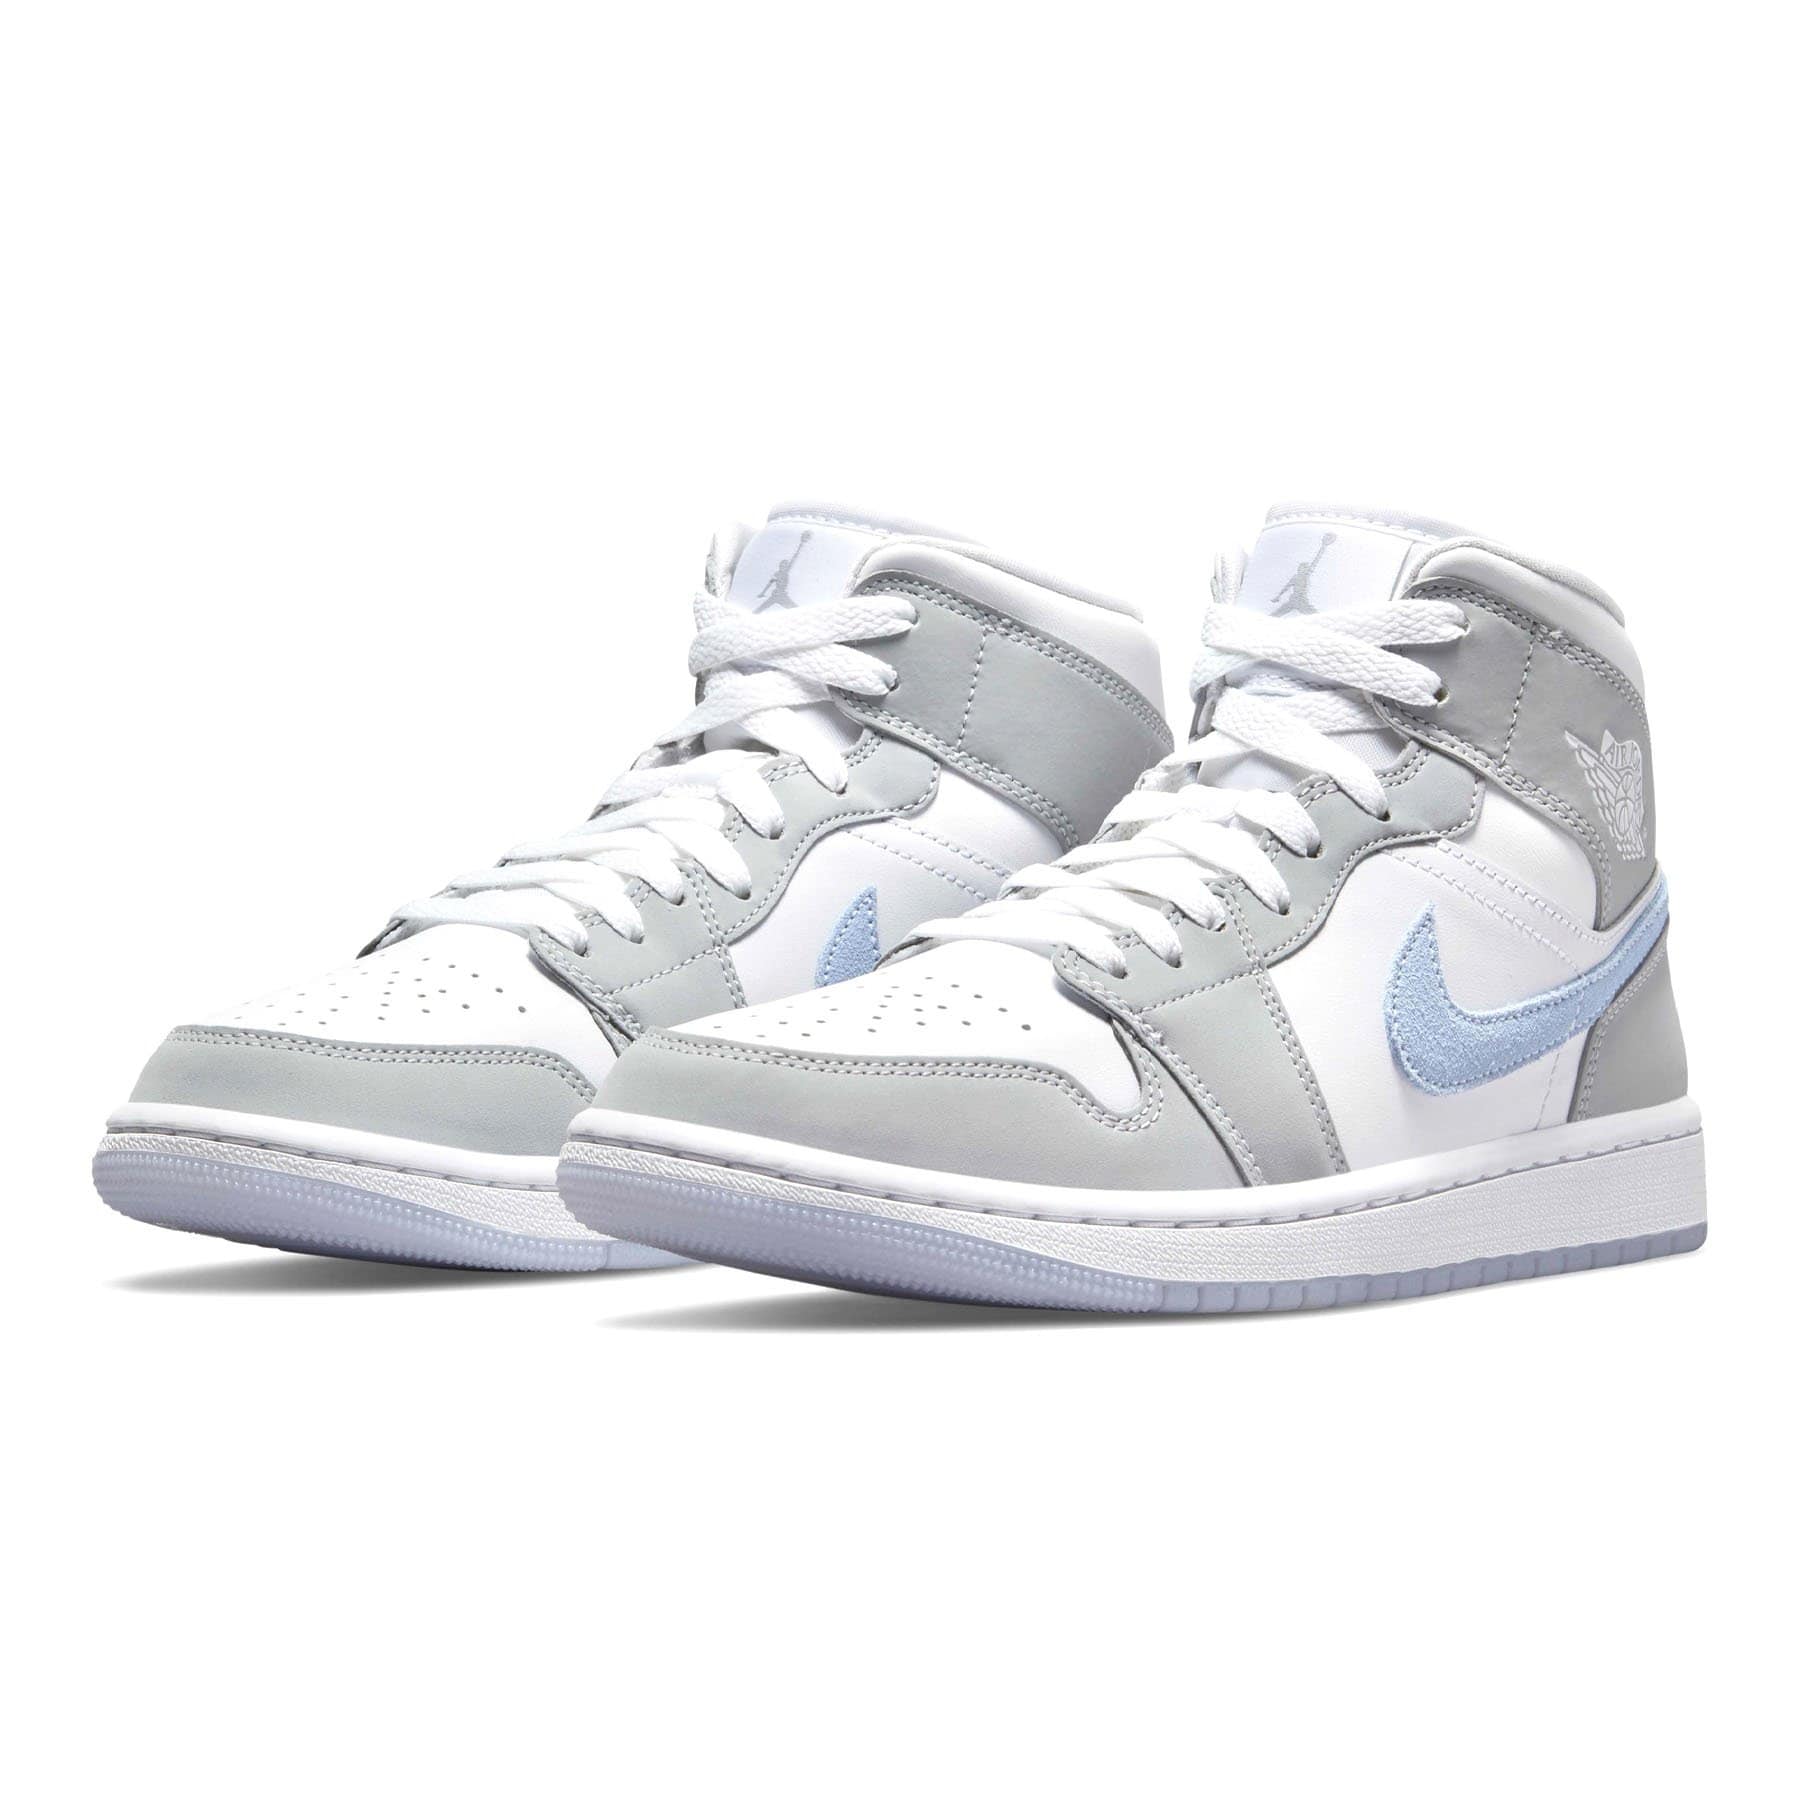 Double Boxed  234.99 Nike Air Jordan 1 Mid Grey Wolf Blue (W) Double Boxed